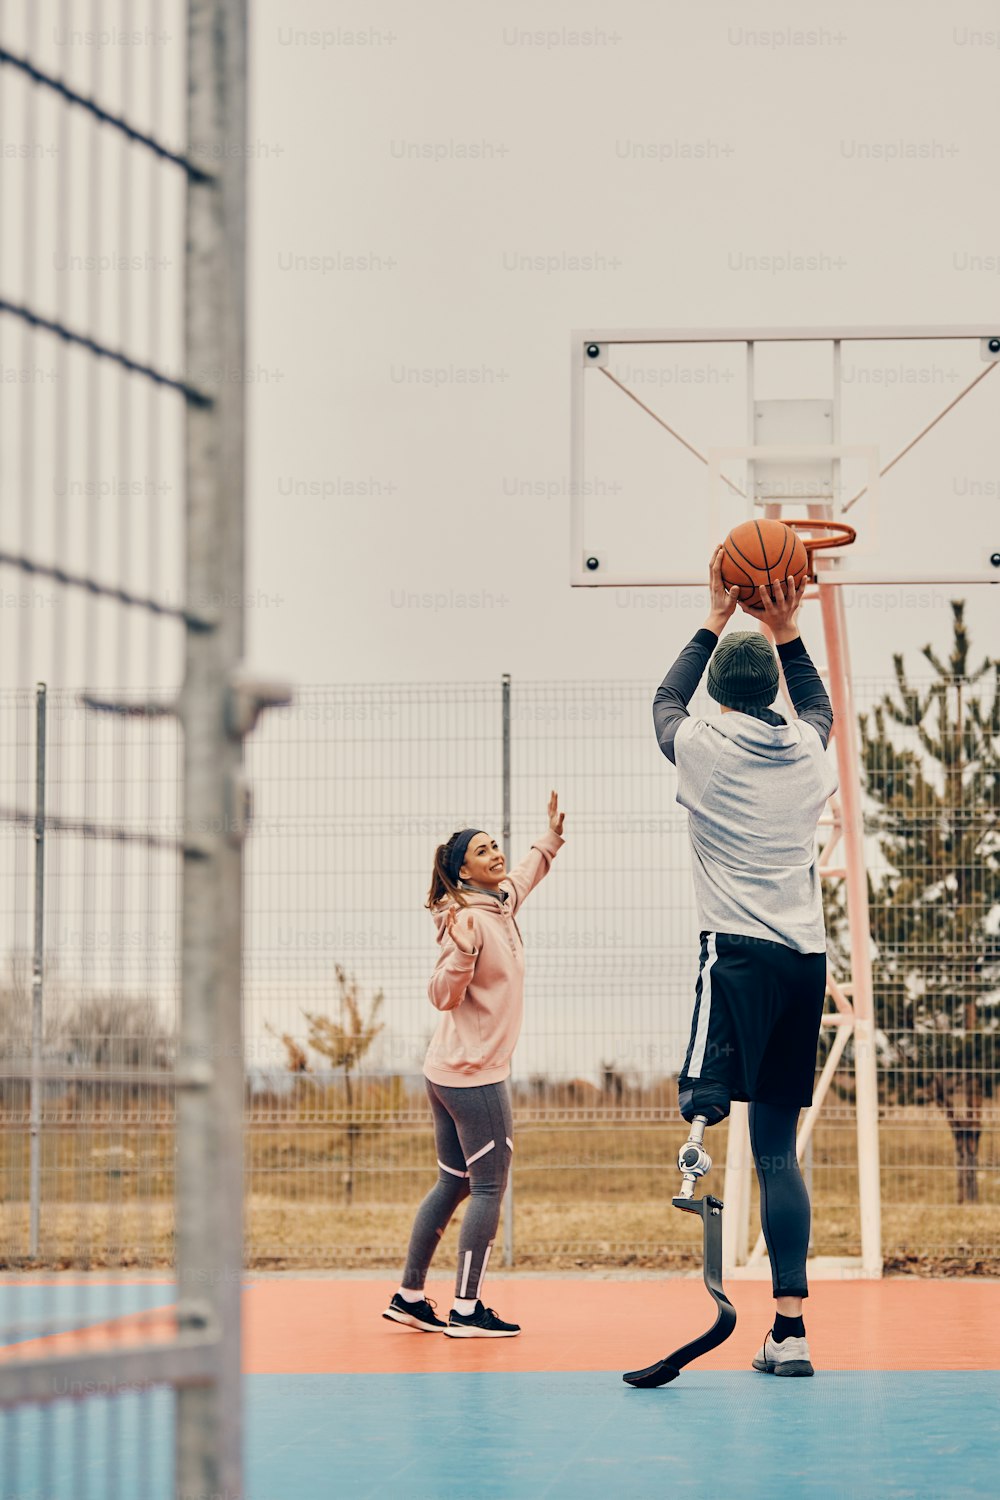 Back view of sportsman with leg prosthesis playing basketball with female friend and shooting at the hoop on outdoor sports court.